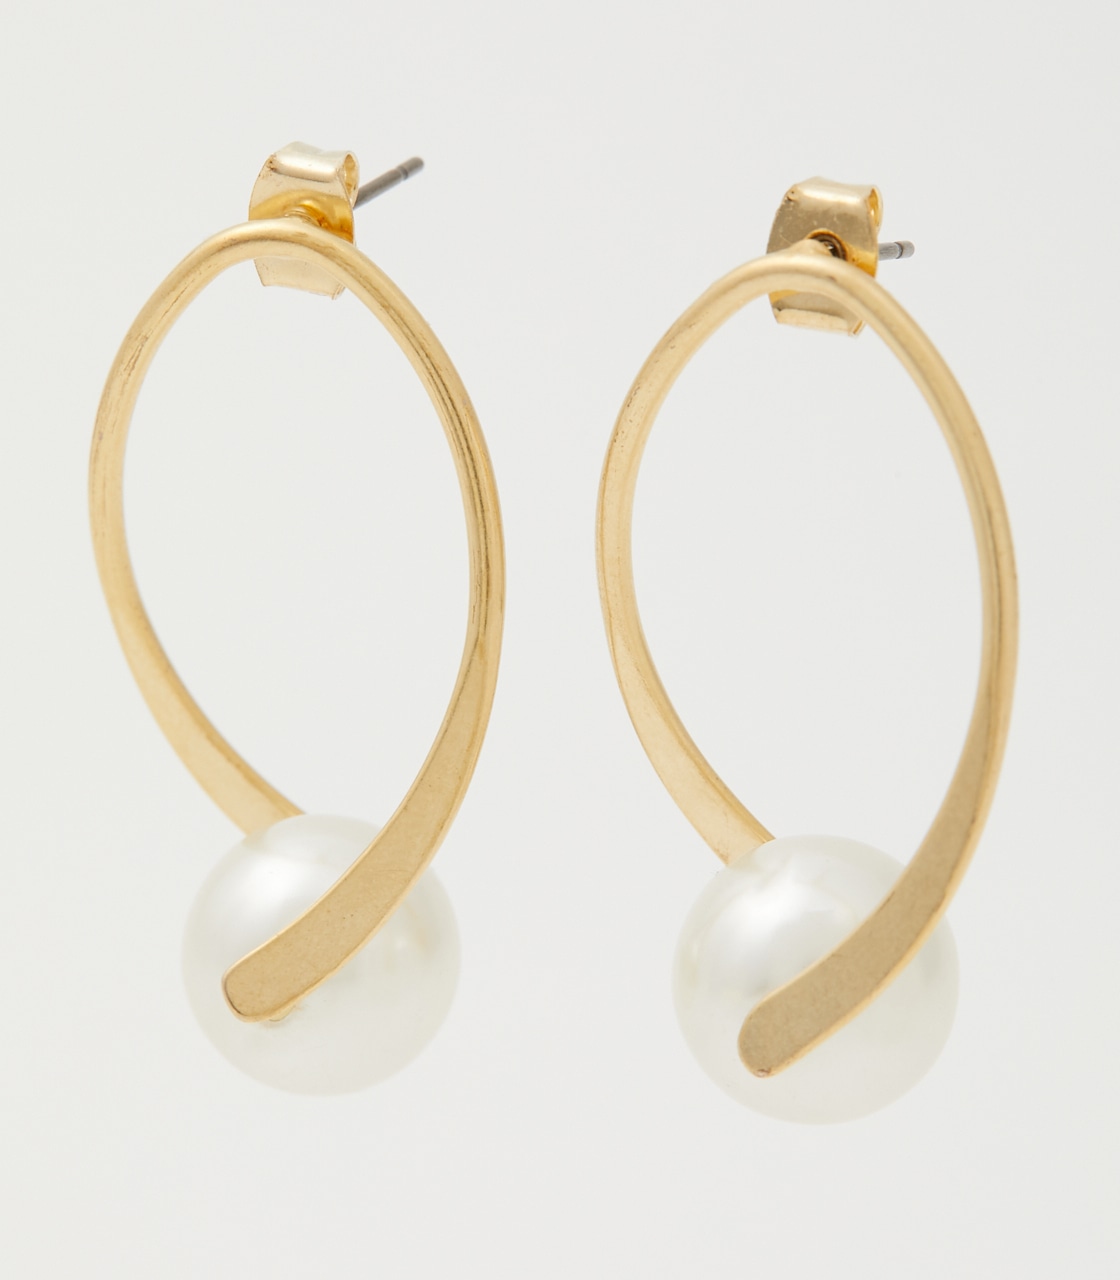 WRAPPED PEARL EARRINGS/ラップパールピアス 詳細画像 L/GLD 2